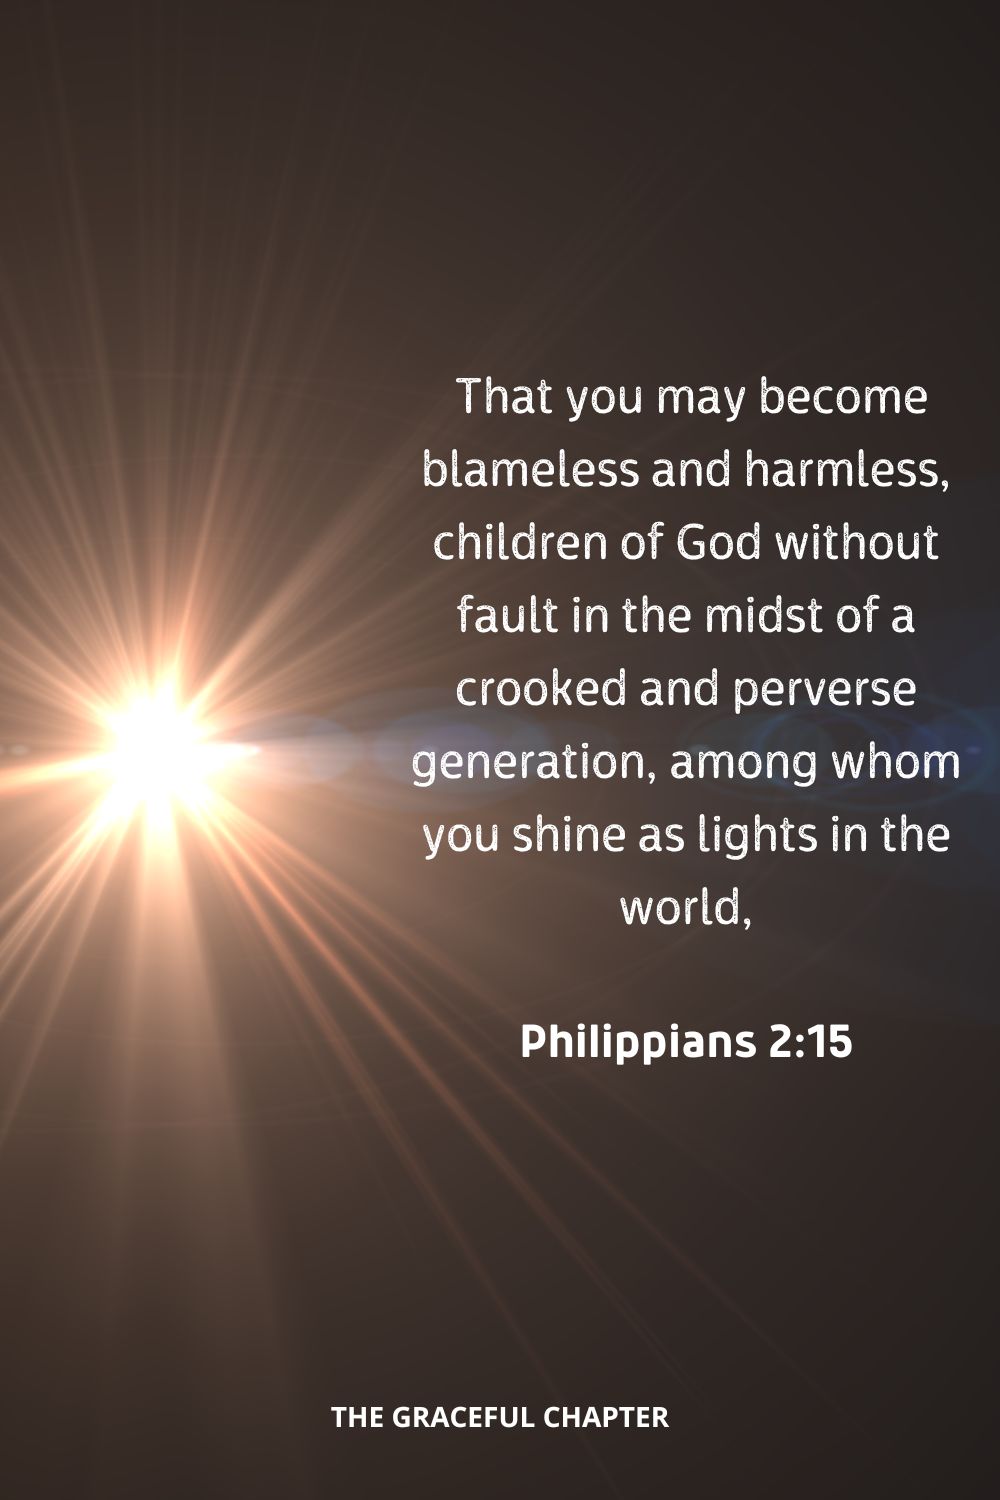  That you may become blameless and harmless, children of God without fault in the midst of a crooked and perverse generation, among whom you shine as lights in the world,